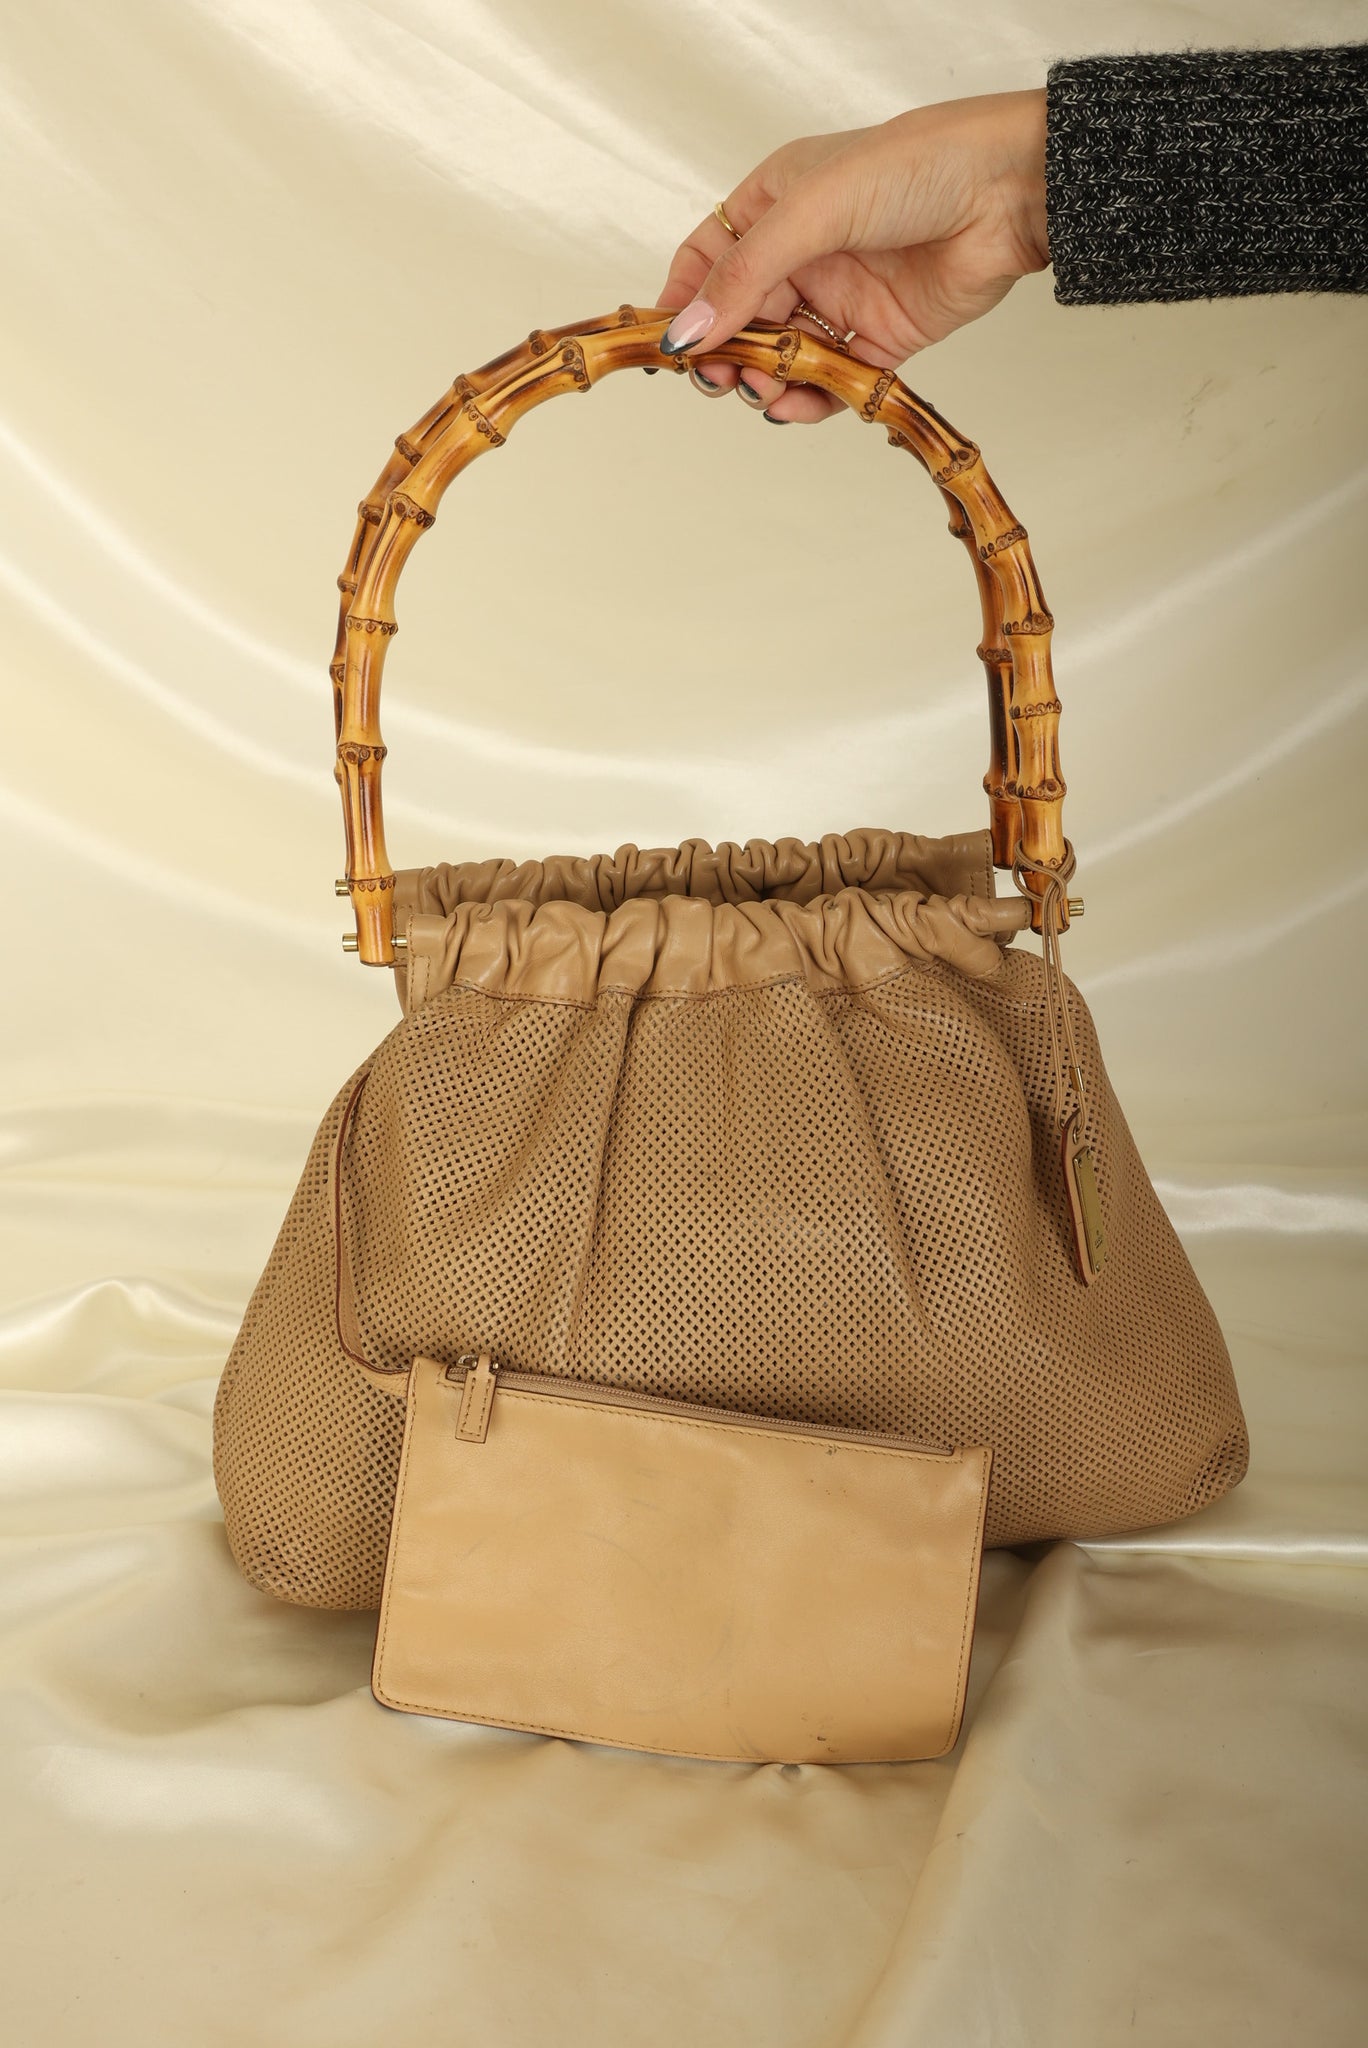 Gucci Perforated Bamboo Handle Bag with Pouch